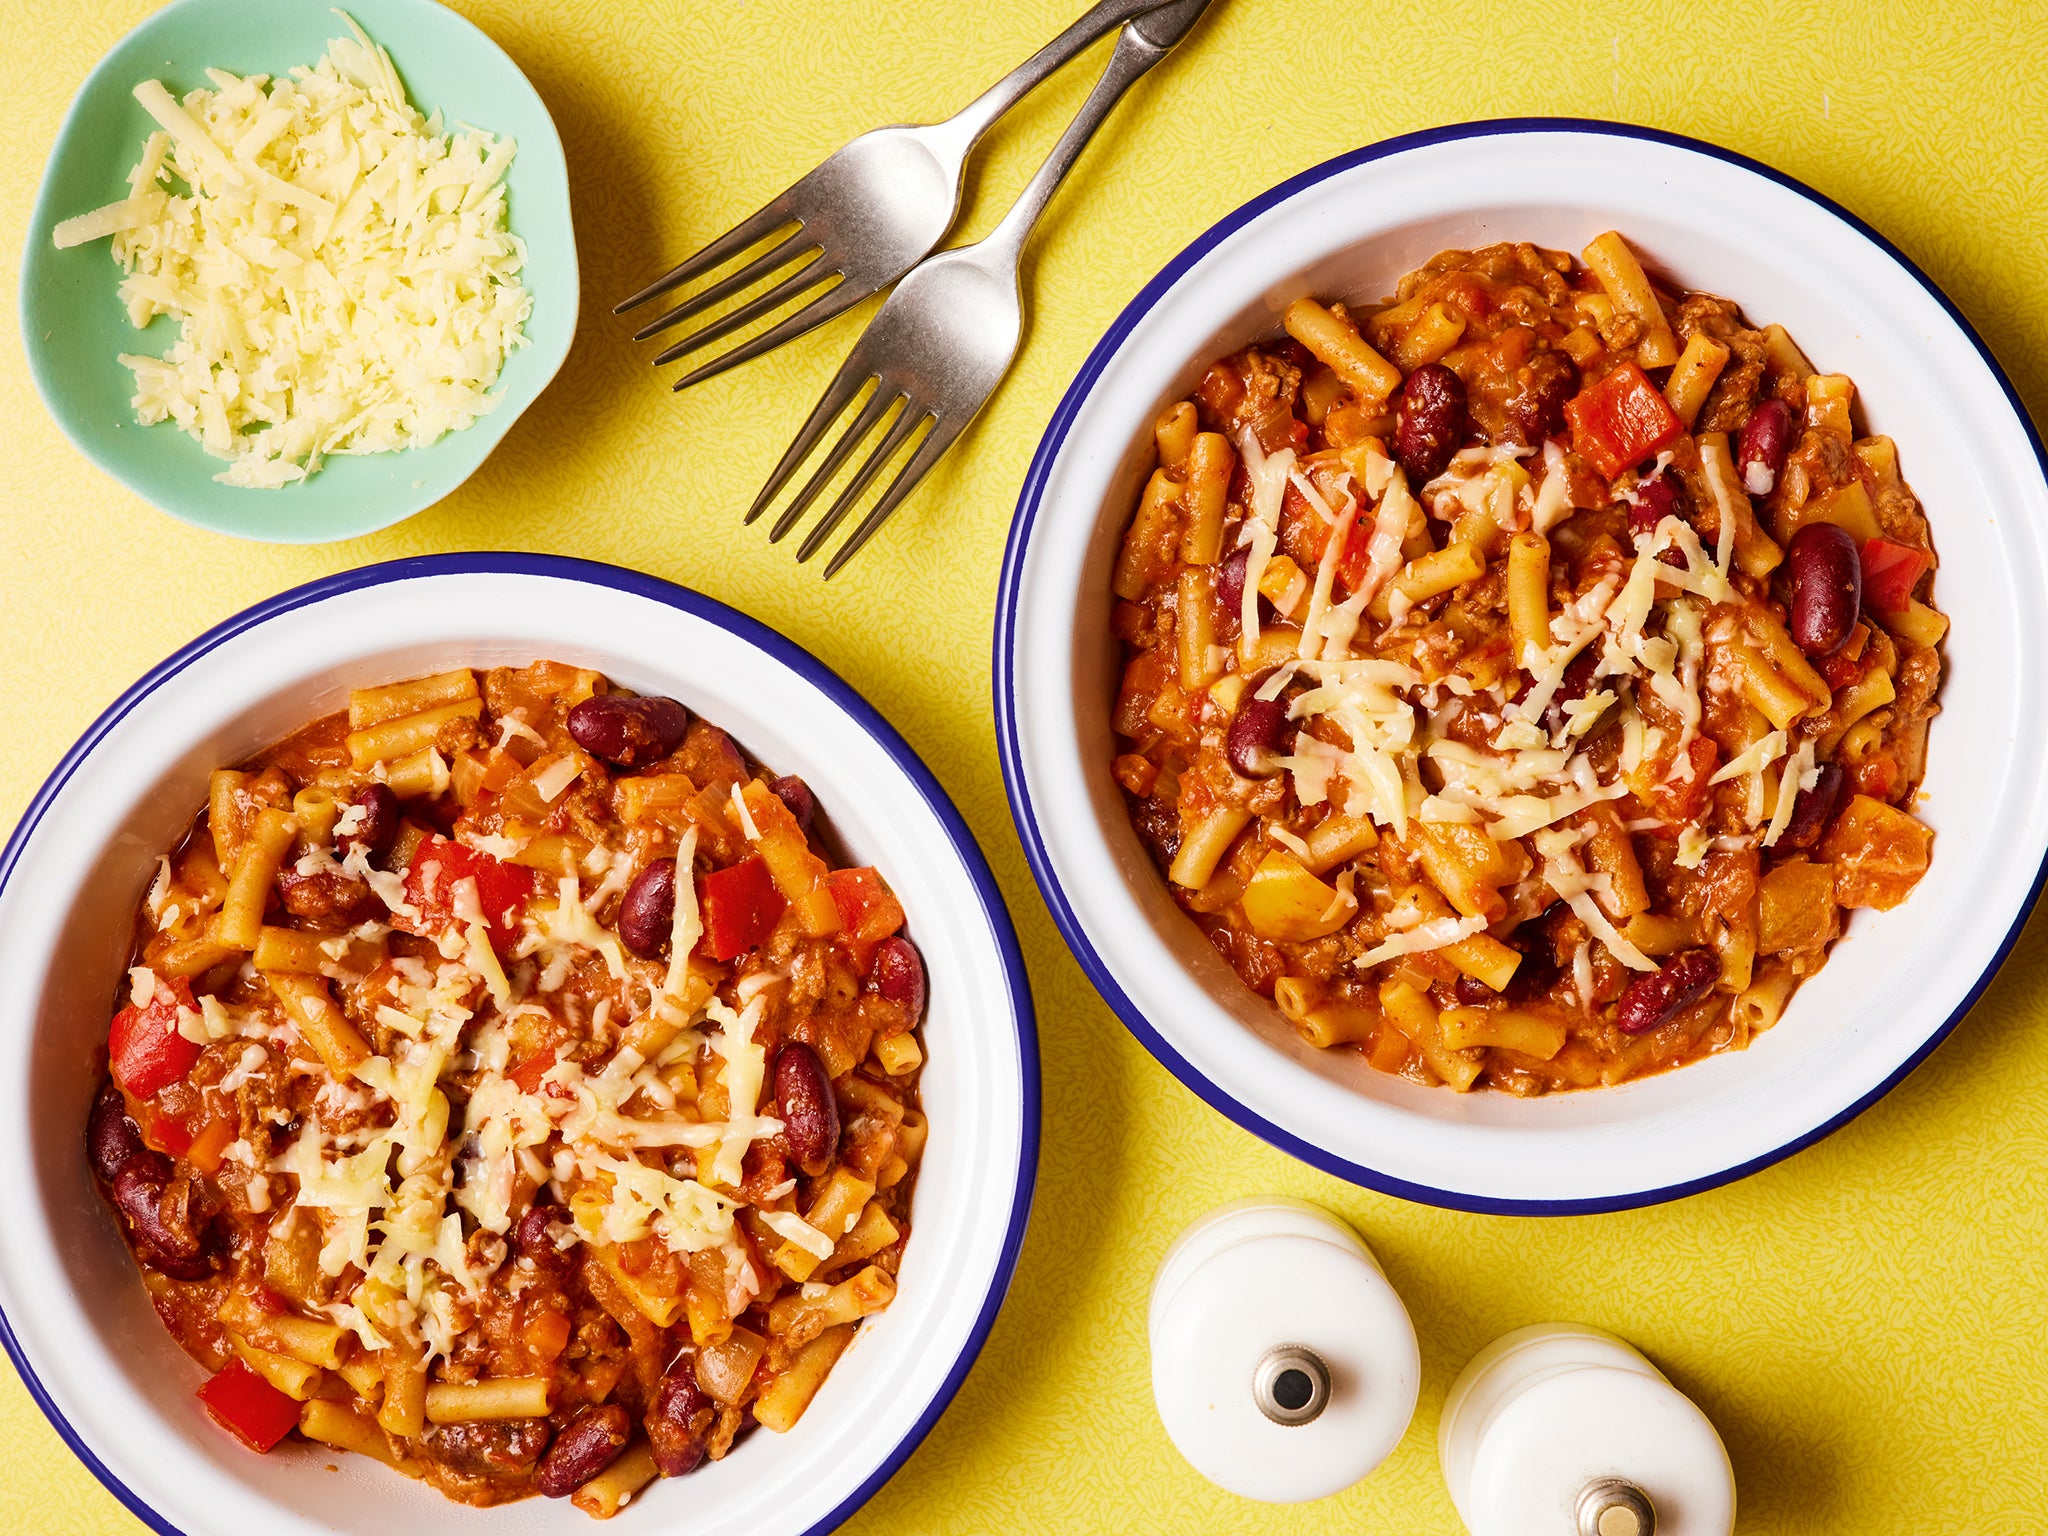 A one-pot version of everyone’s favourite comfort food